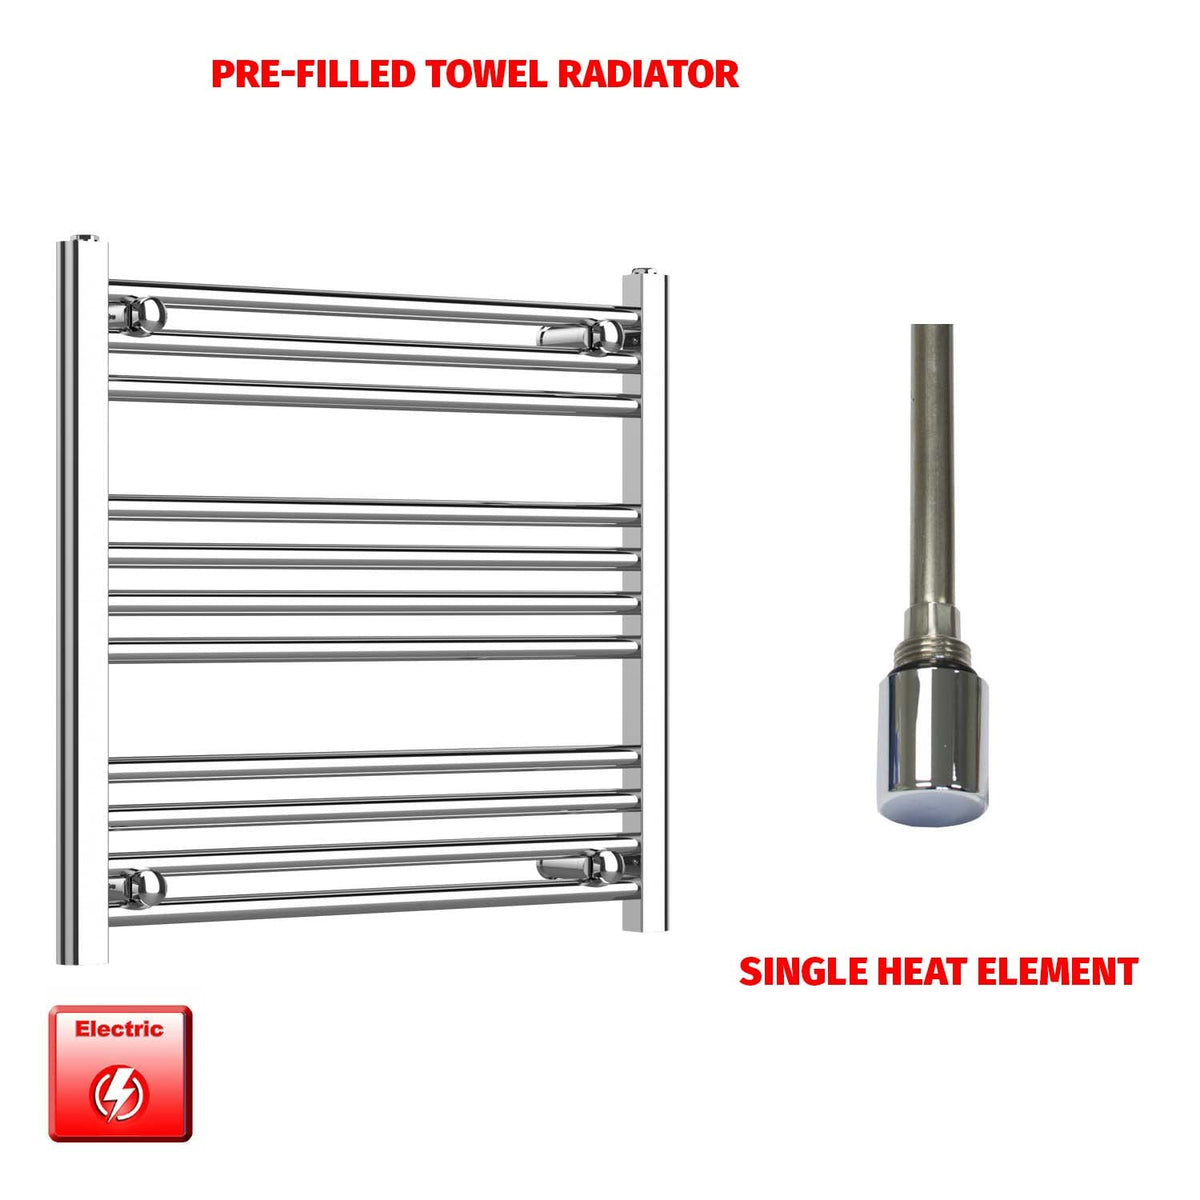 600mm High 650mm Wide Pre-Filled Electric Heated Towel Radiator Straight Chrome